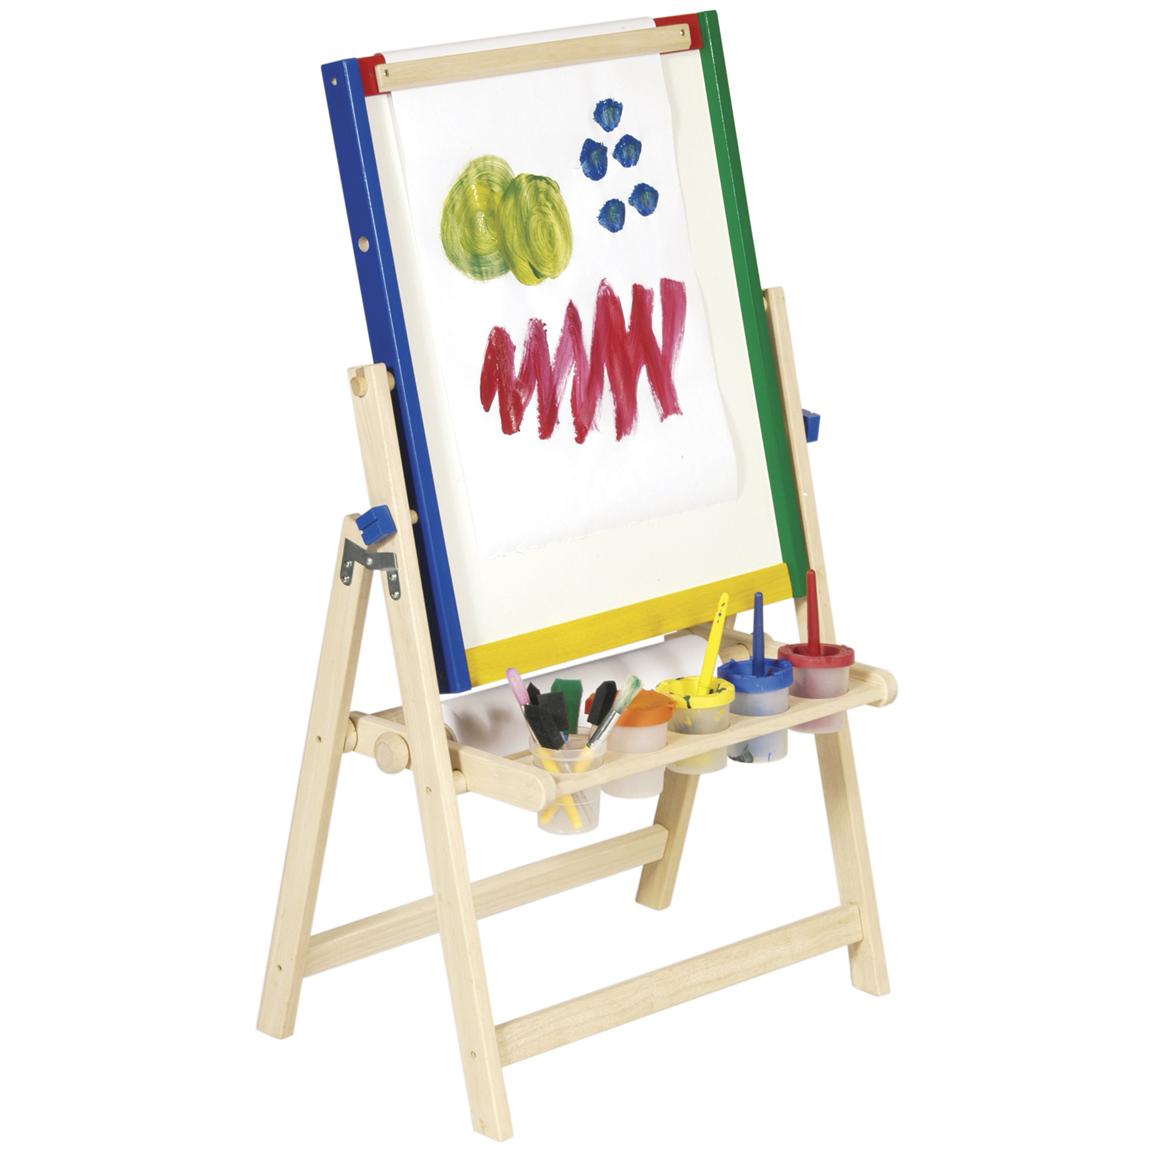 GuideCraft™ 4-in-1 Flipping Floor Easel - 212345, Toys at Sportsman's Guide